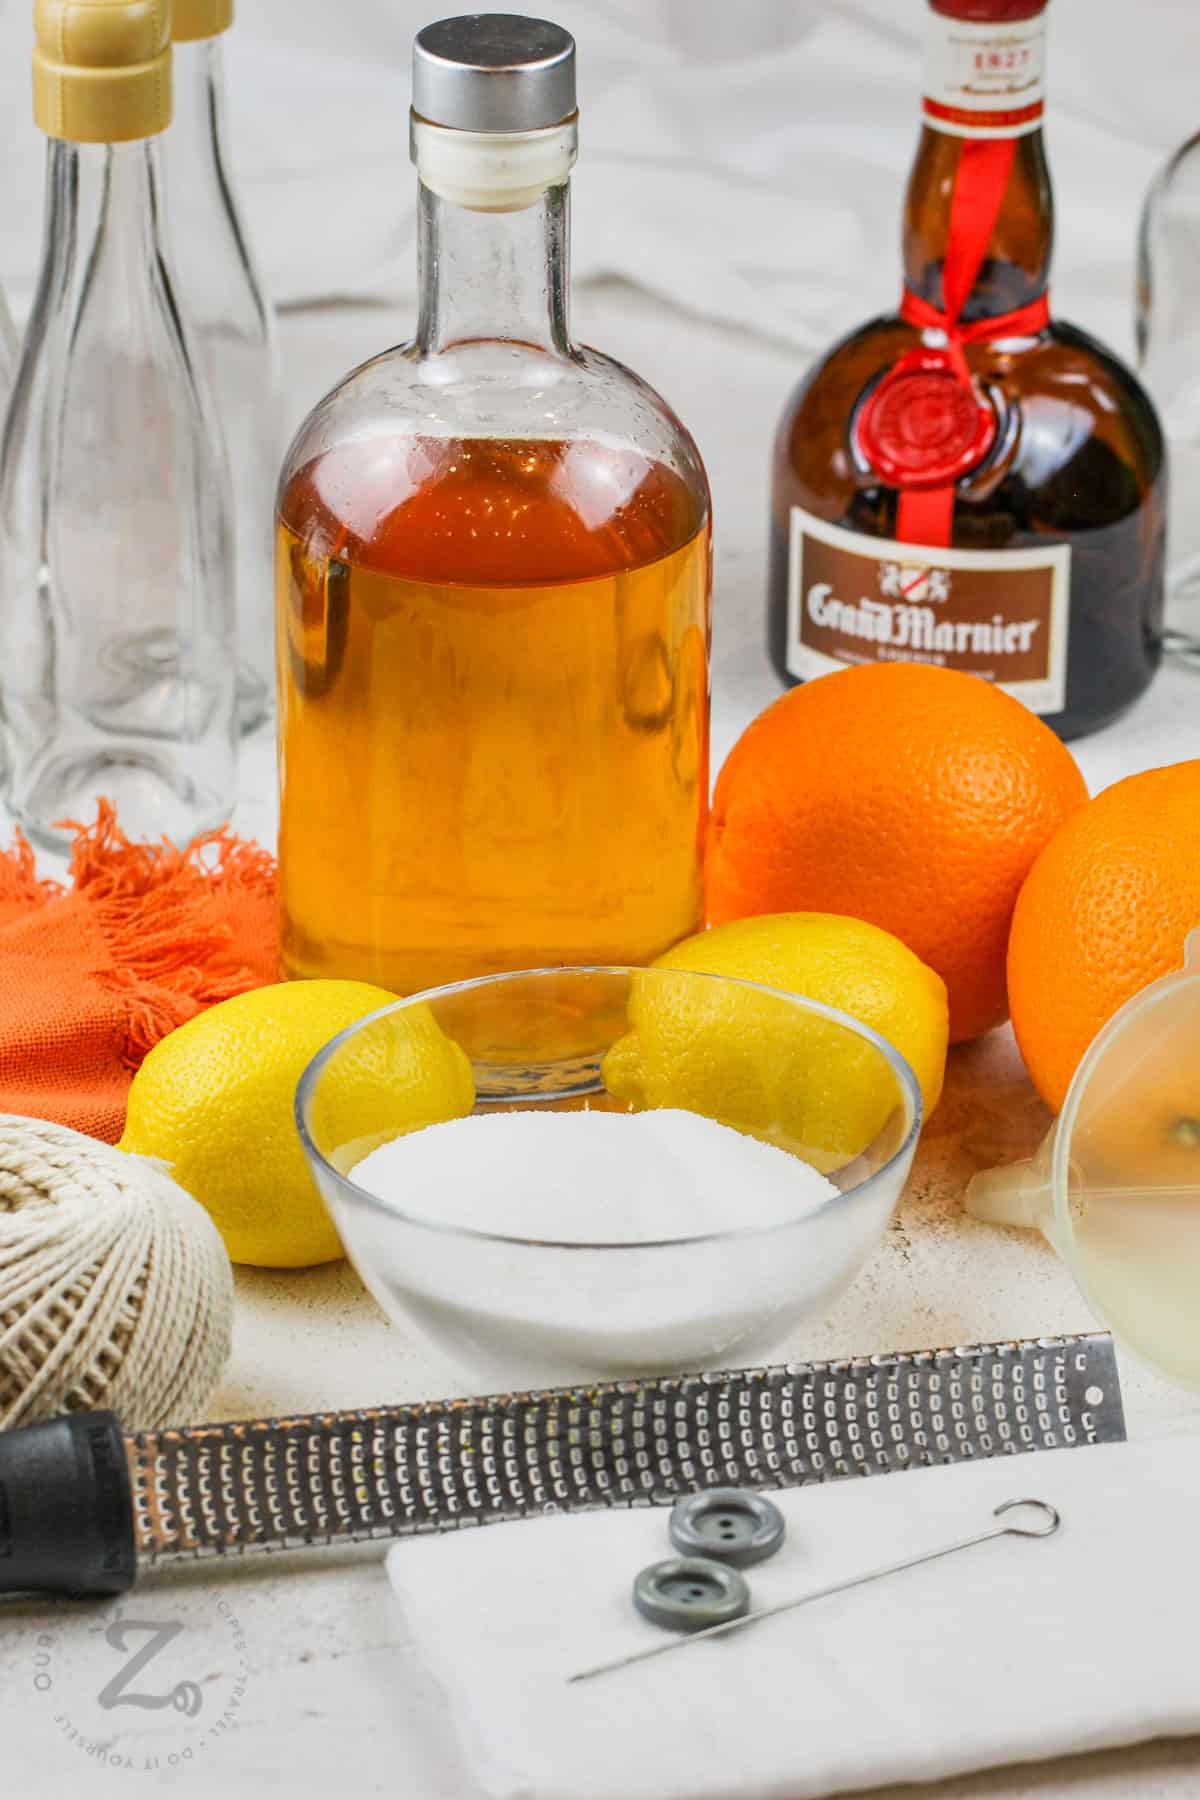 Homemade Grand Marnier ingredients and tools